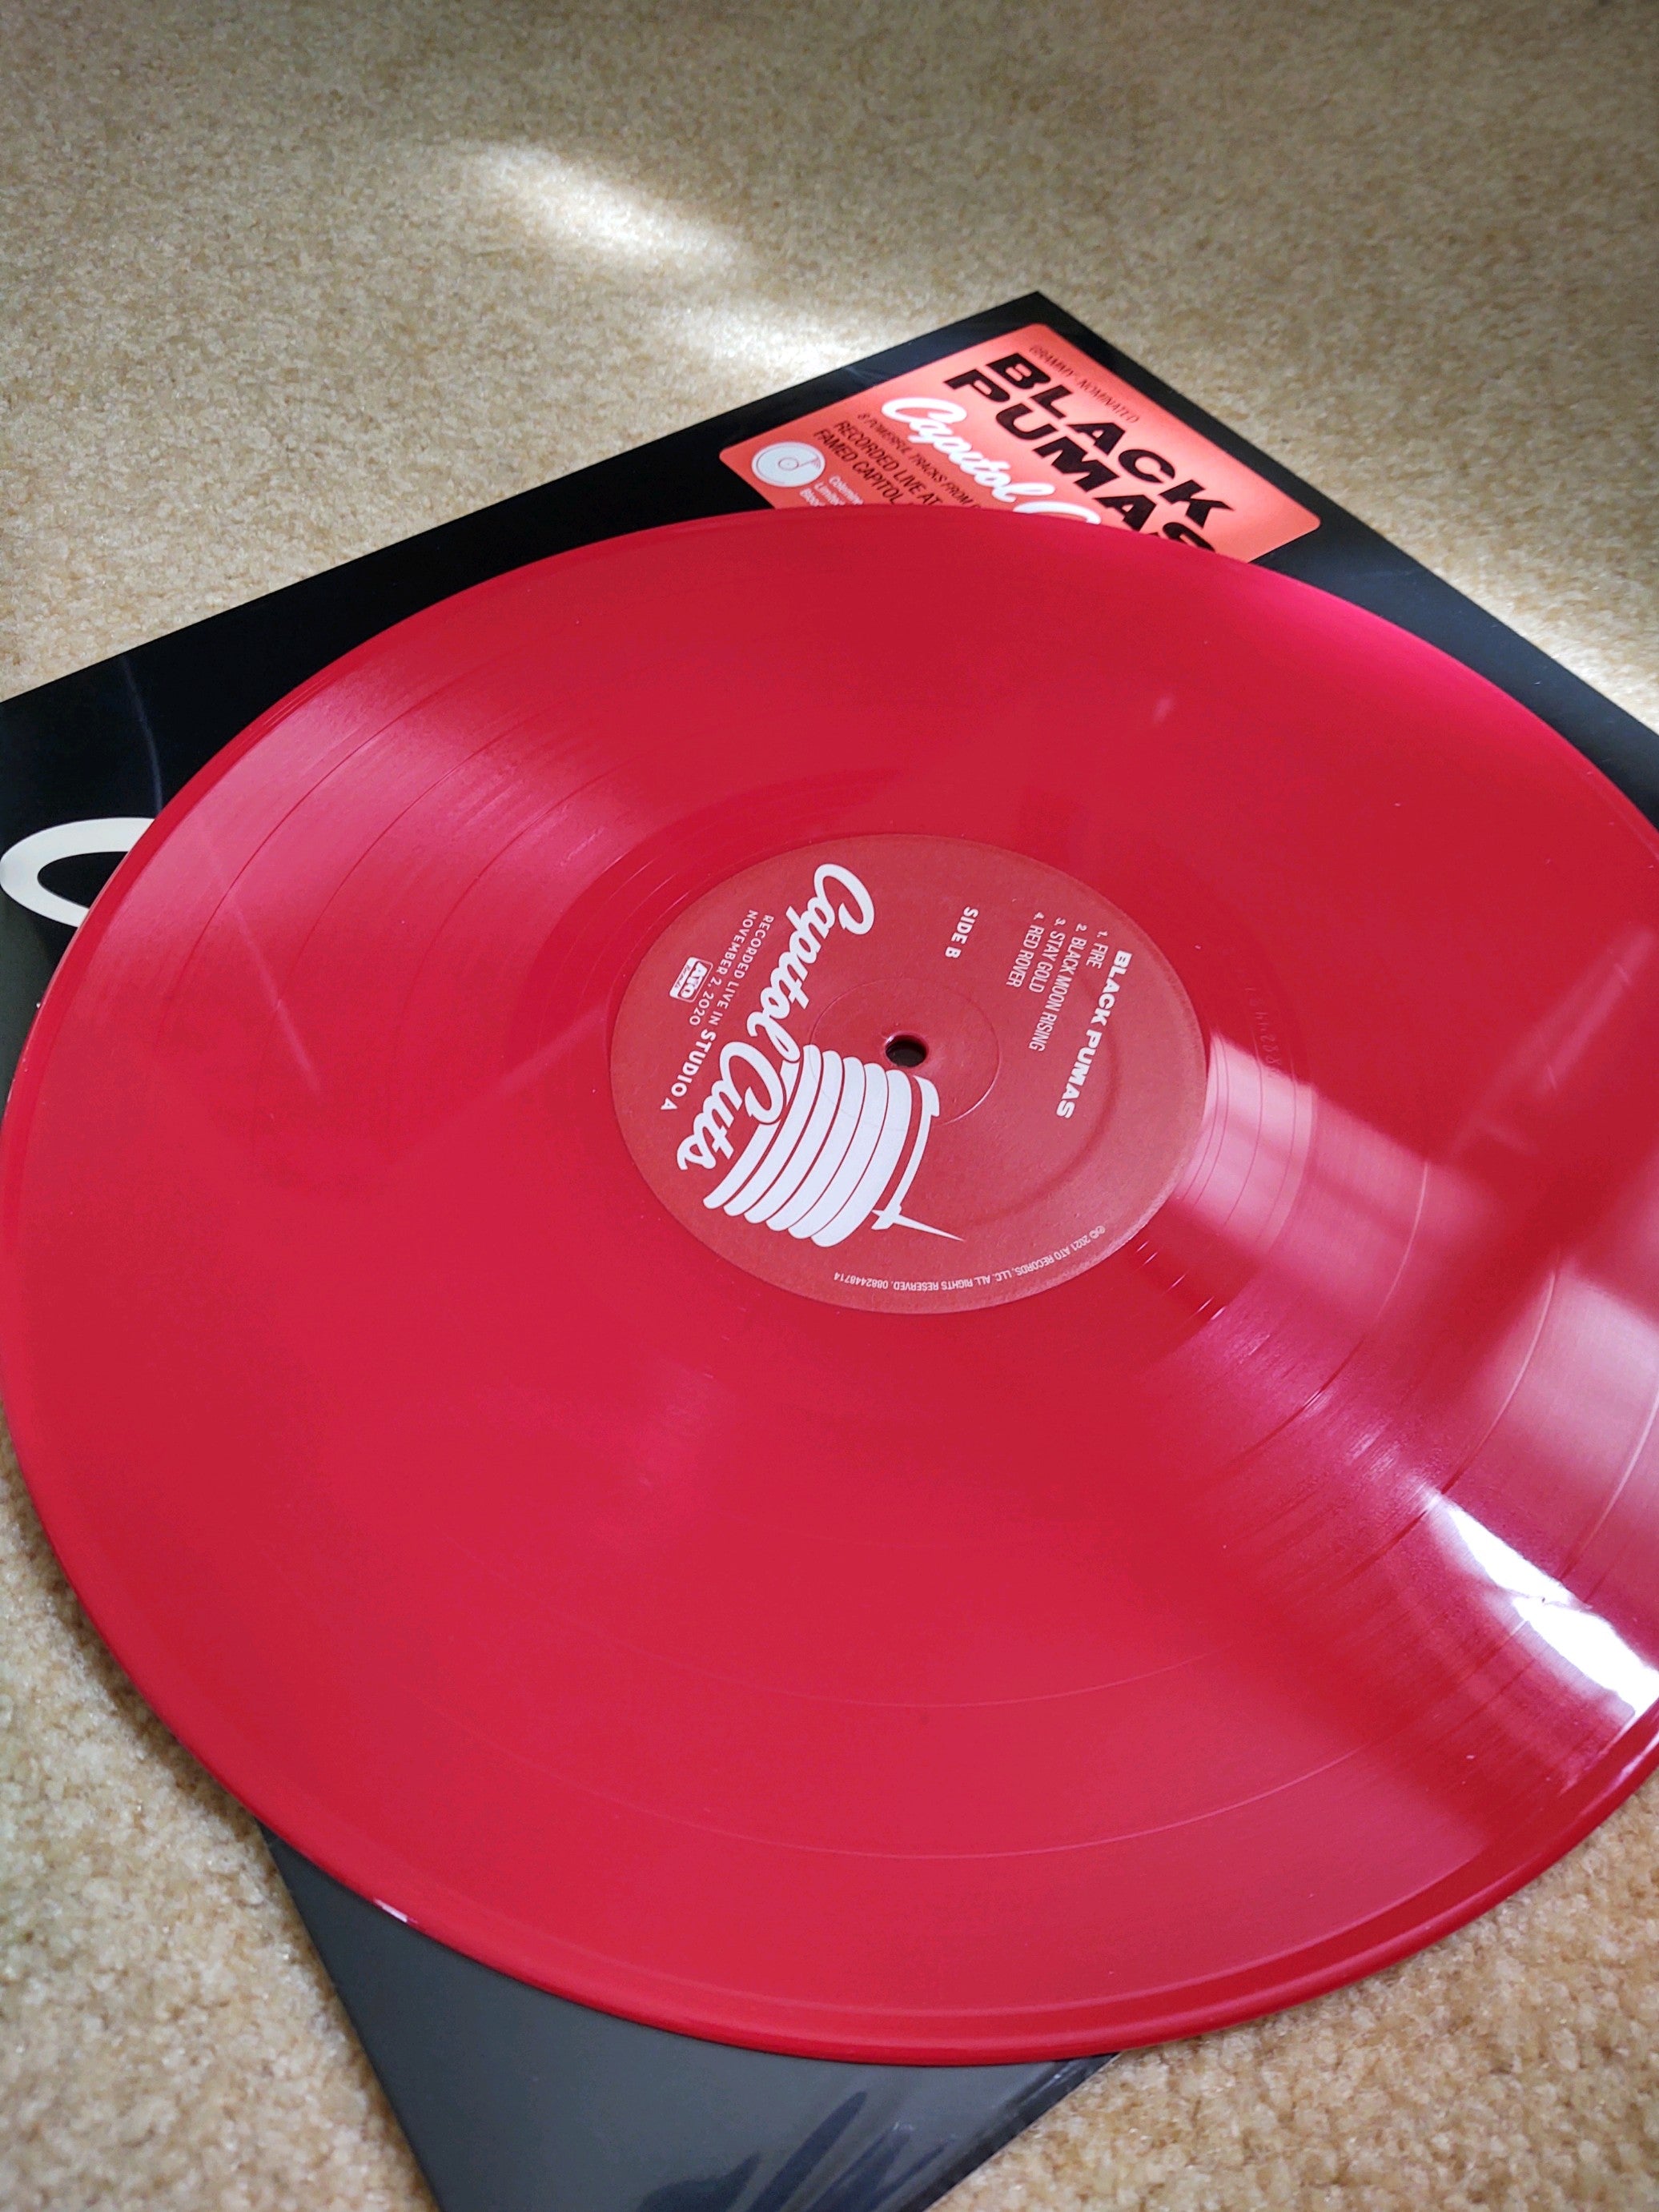 [DAMAGED] Black Pumas - Capitol Cuts: Live from Studio A [Opaque Red Vinyl]